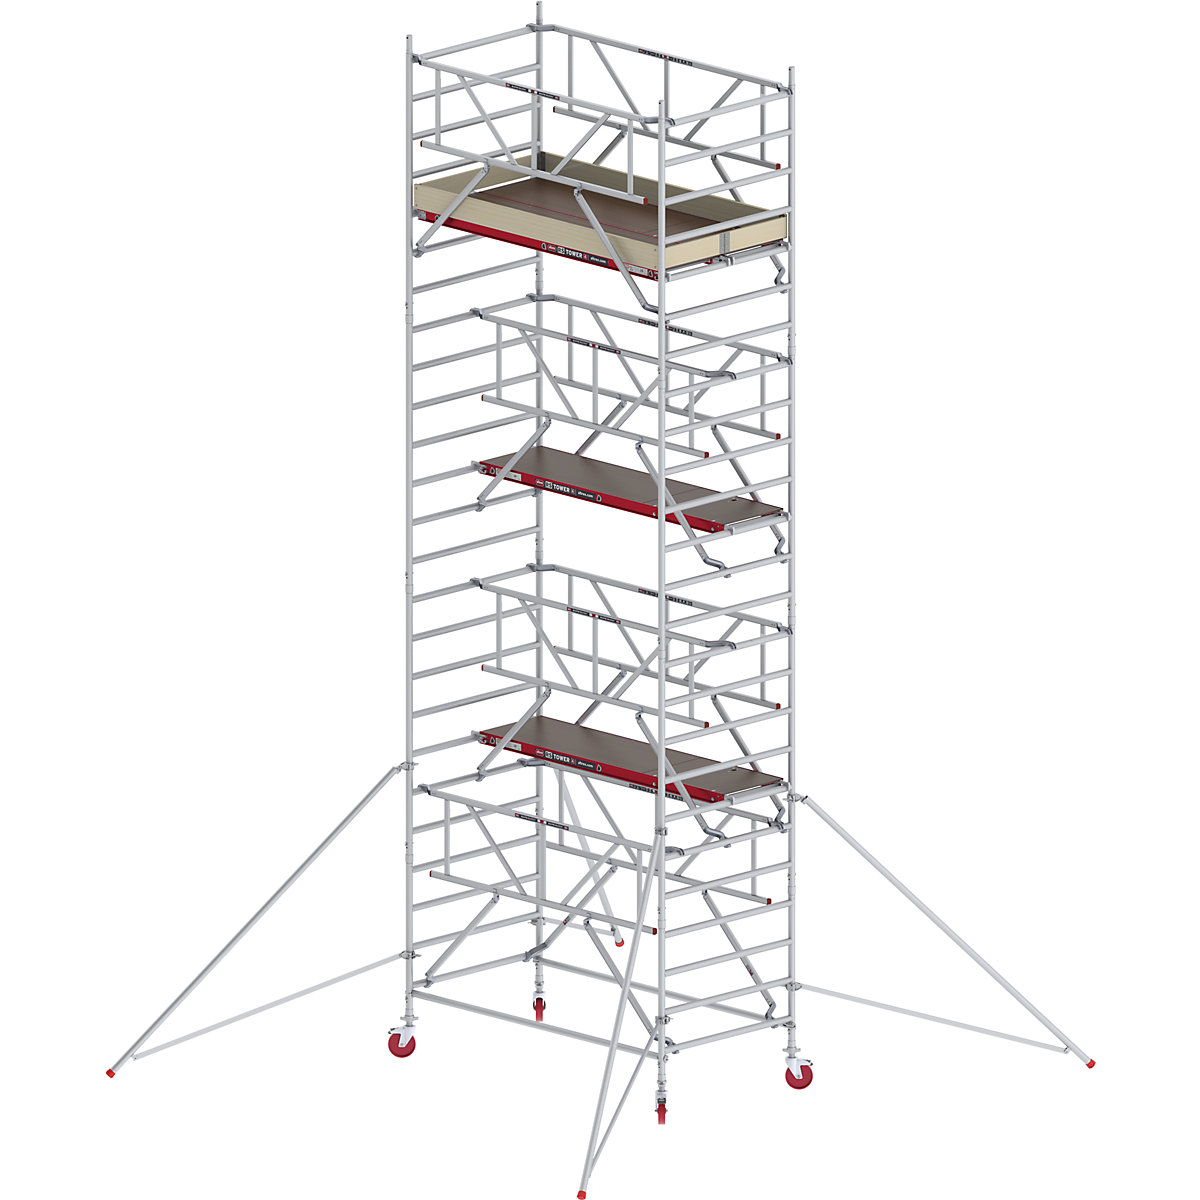 RS TOWER 42 wide mobile access tower with Safe-Quick® – Altrex, wooden platform, length 2.45 m, working height 8.20 m-11